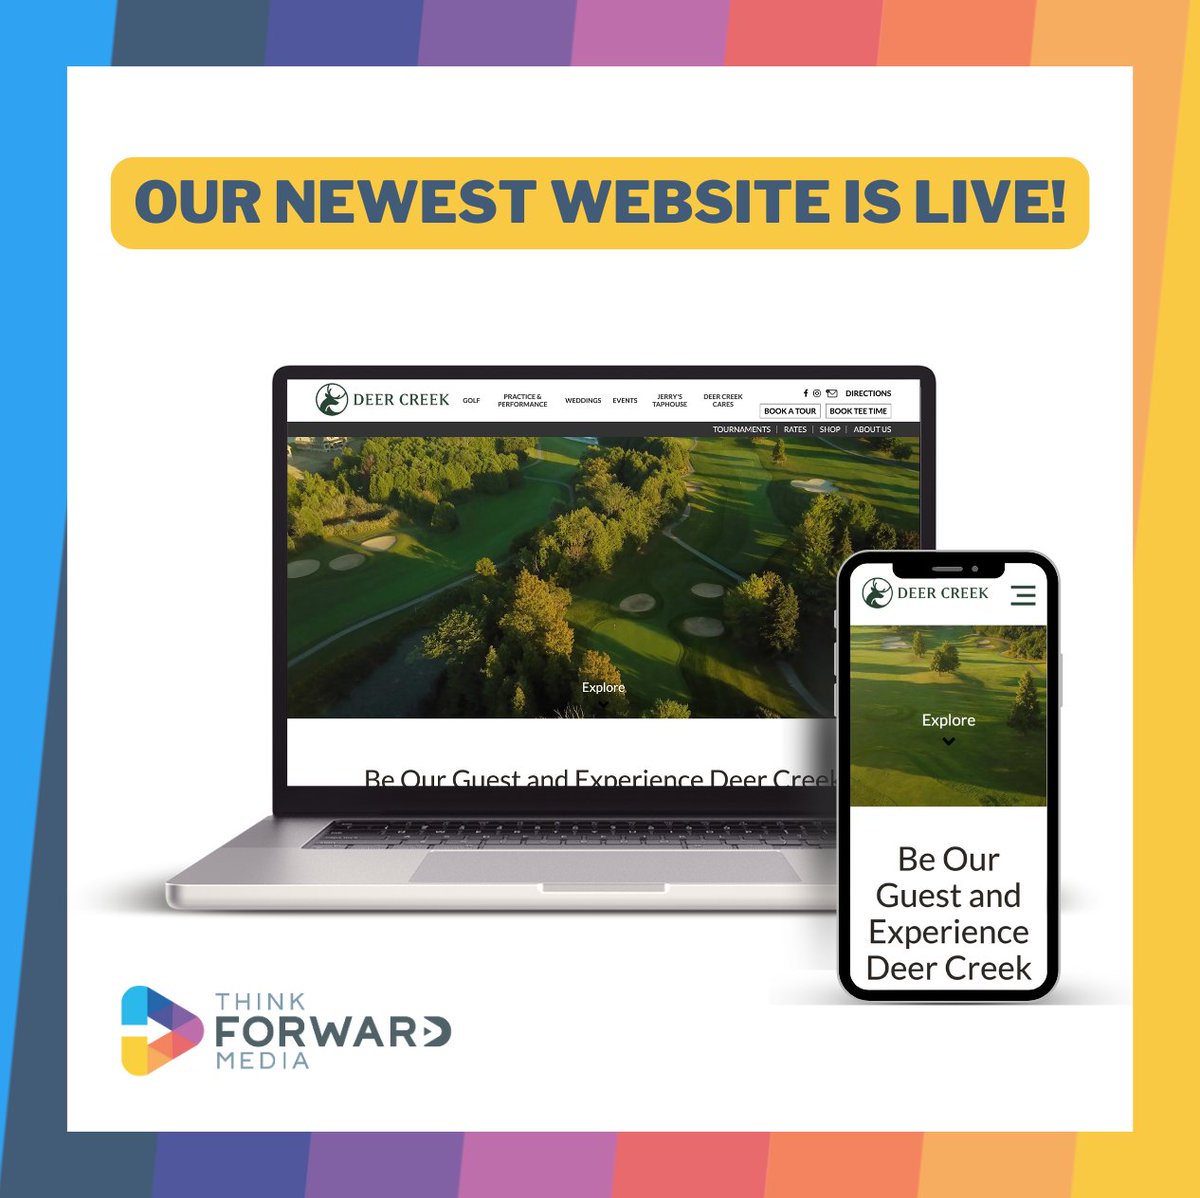 Our newest website is live! 

Check out the website here: mydeercreek.com

.
.
.
#Barrie #webDesign #WebDevelopment #CanadianBusinessOwner #canadaBusiness #torontobusinessowner #ontarioBusiness #MyDeerCreek #DeerCreek #DeerCreekGolfAndBanquet #OntarioGolf